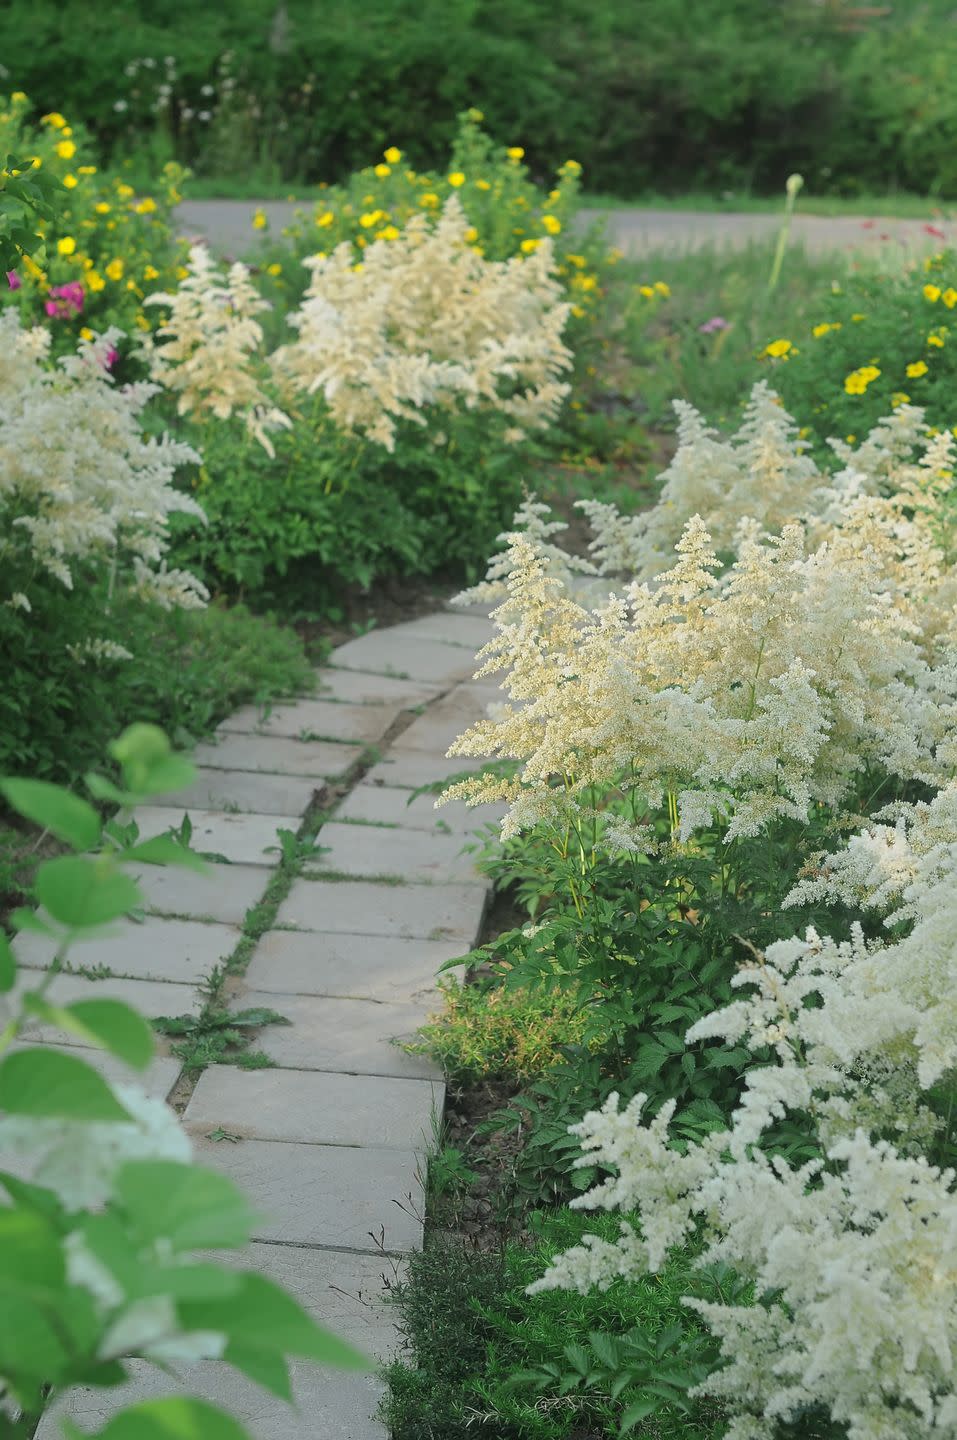 travel photography, landscape design with white astilbe bushes along a path paved with stone slabs closeup selective focus